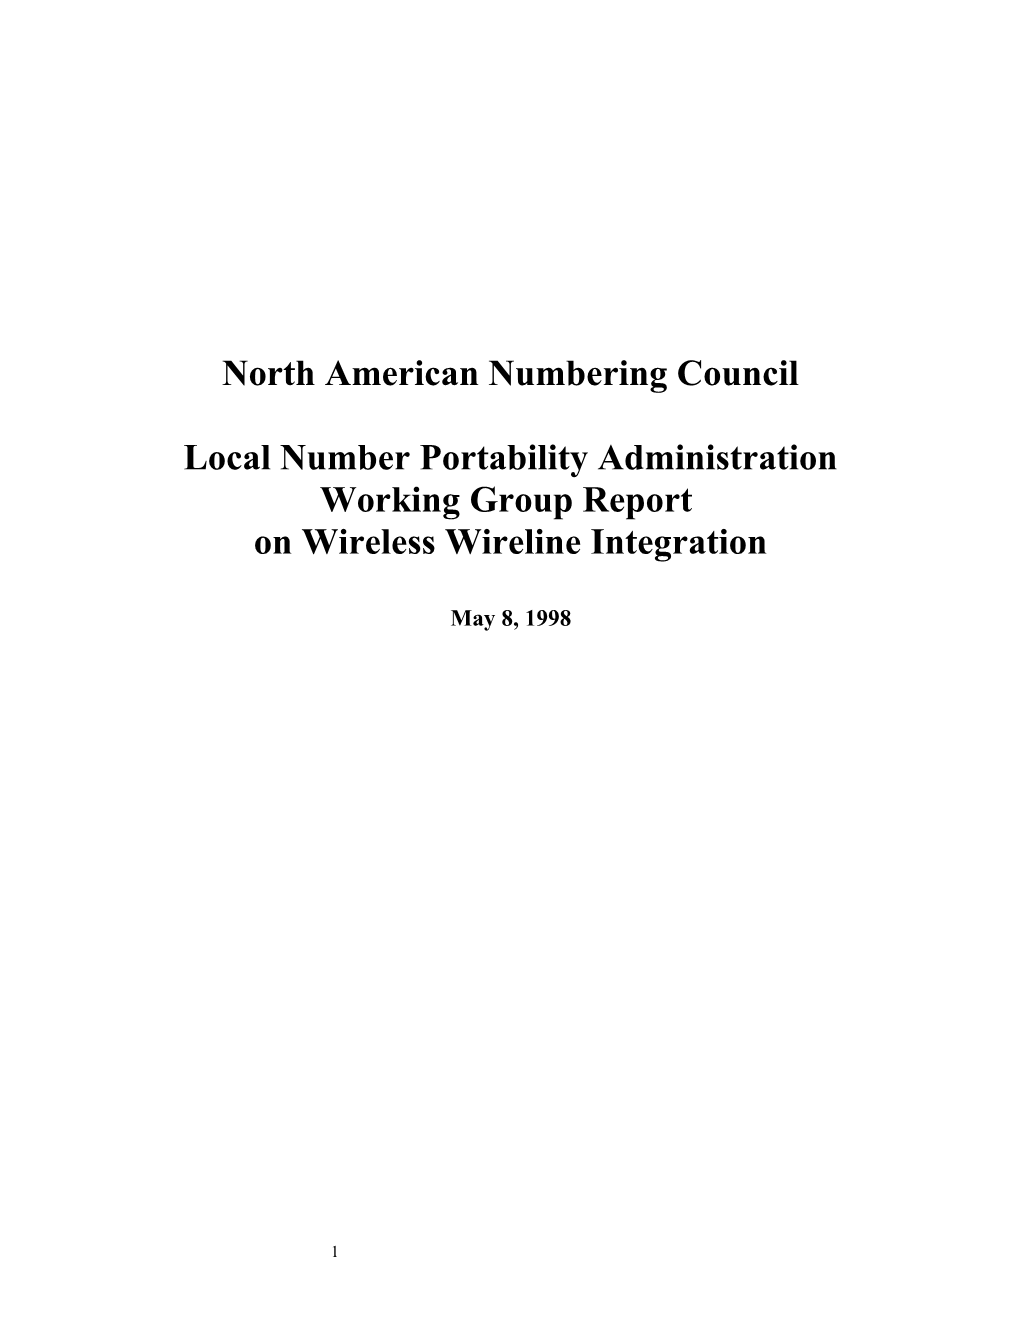 May 8, 1998North American Numbering Council